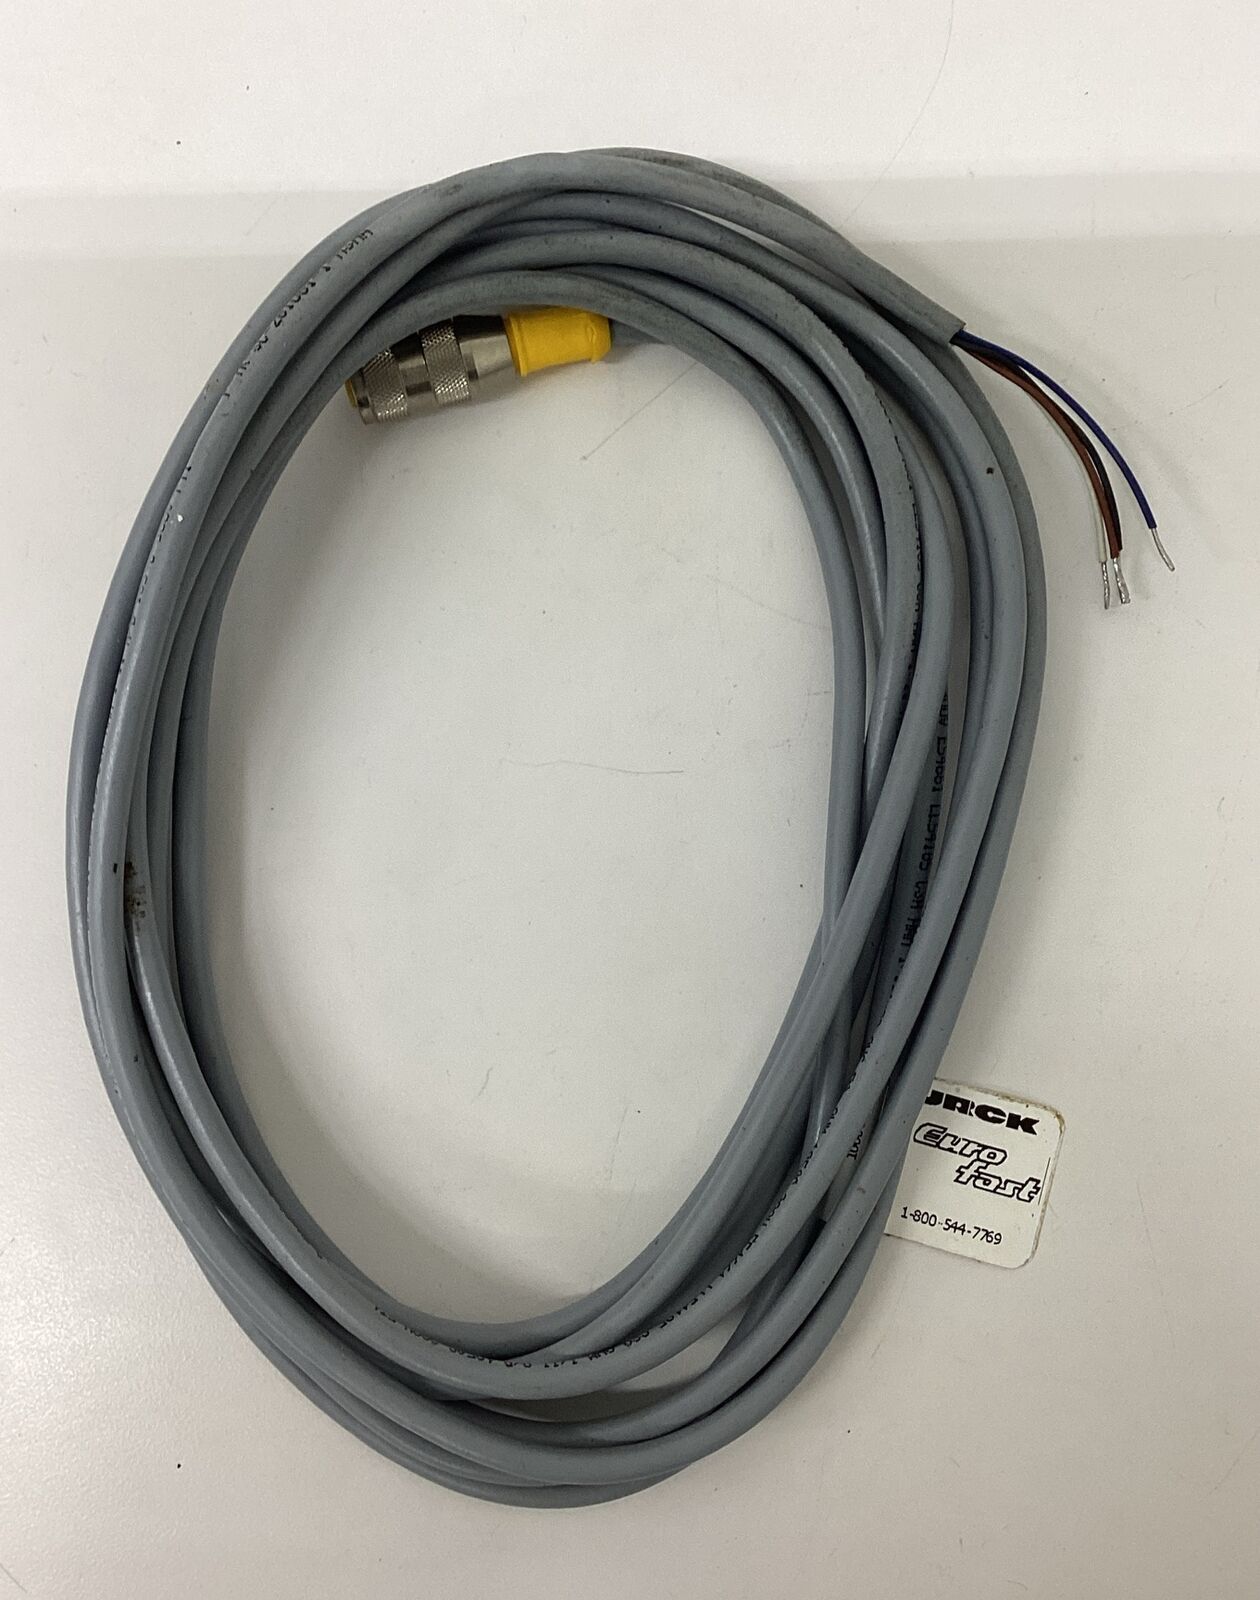 Turck RK4.4T-4 / U2173 M12 4-Wire Straight Single End Cable 4M (RE154)